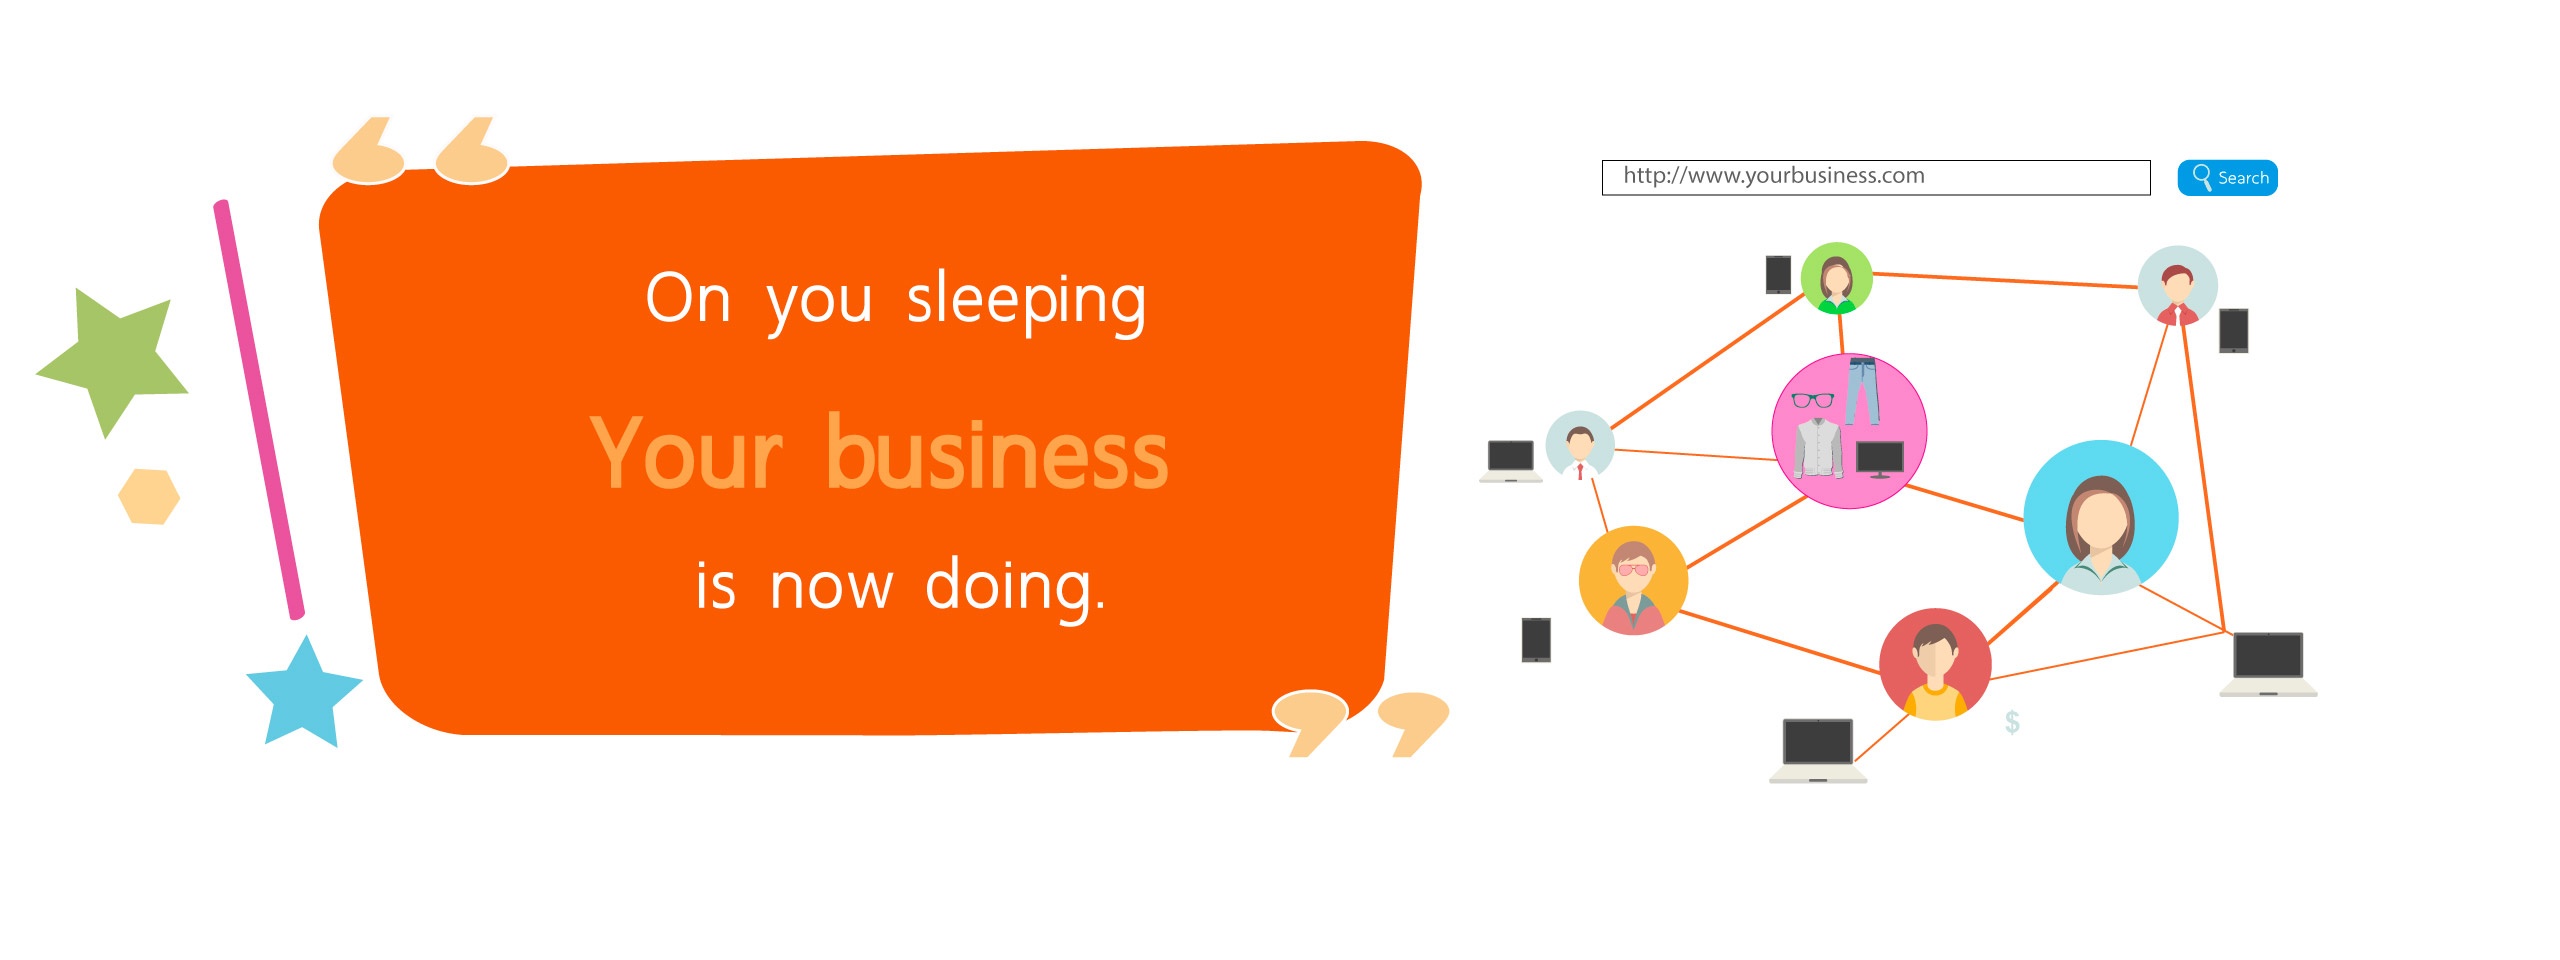 On you sleeping your business is no doing.